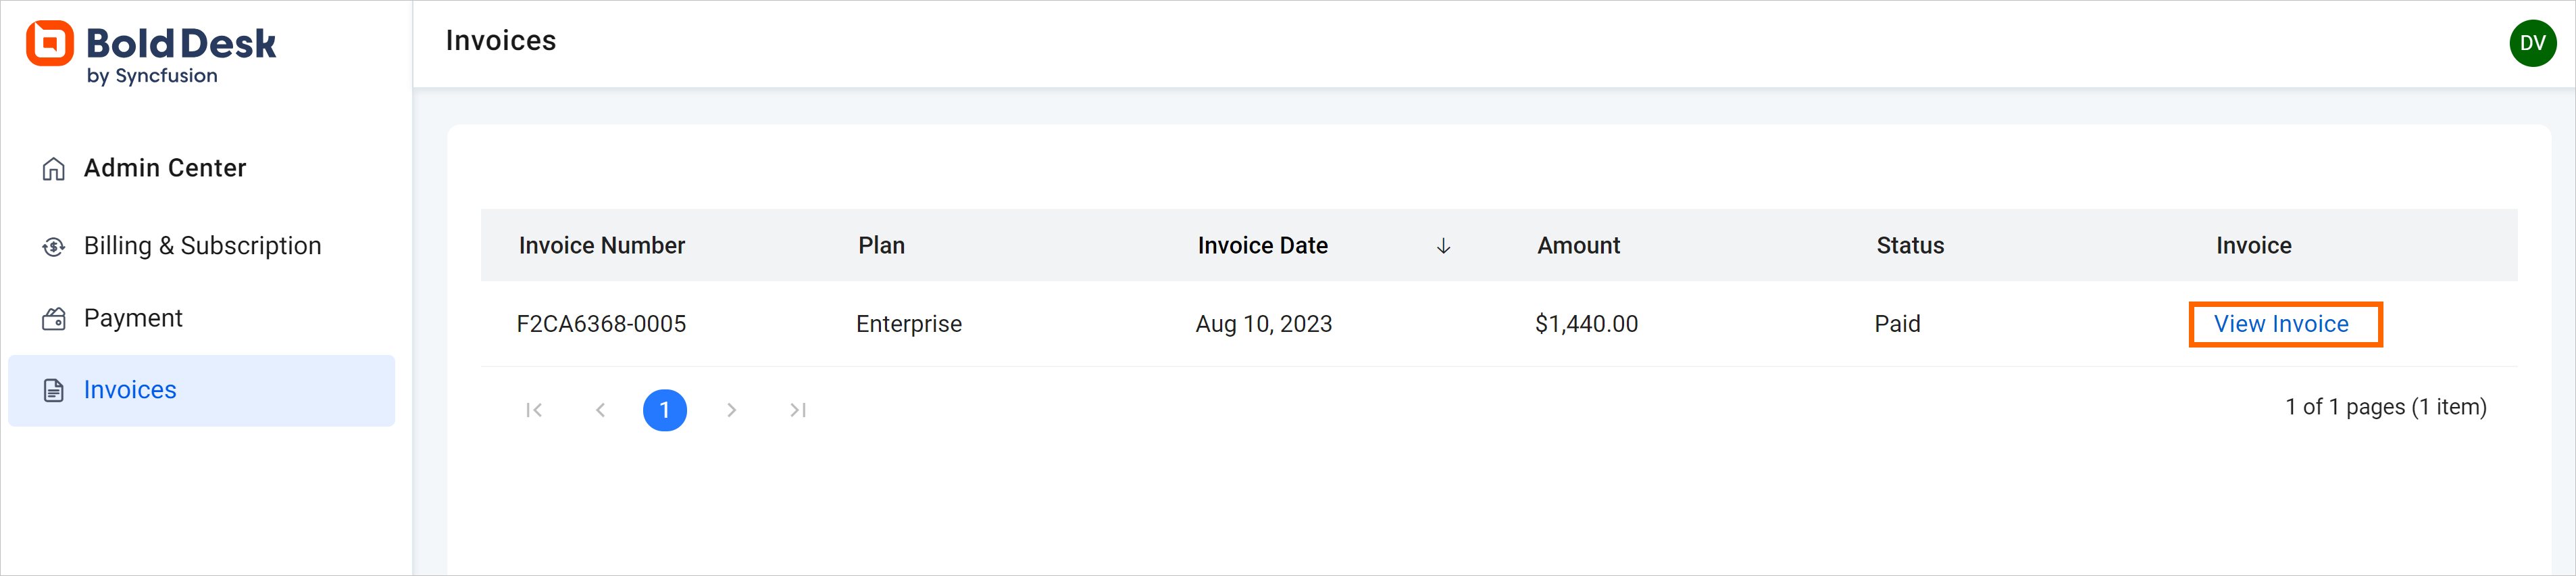 invoice-page-link-highlighted.png